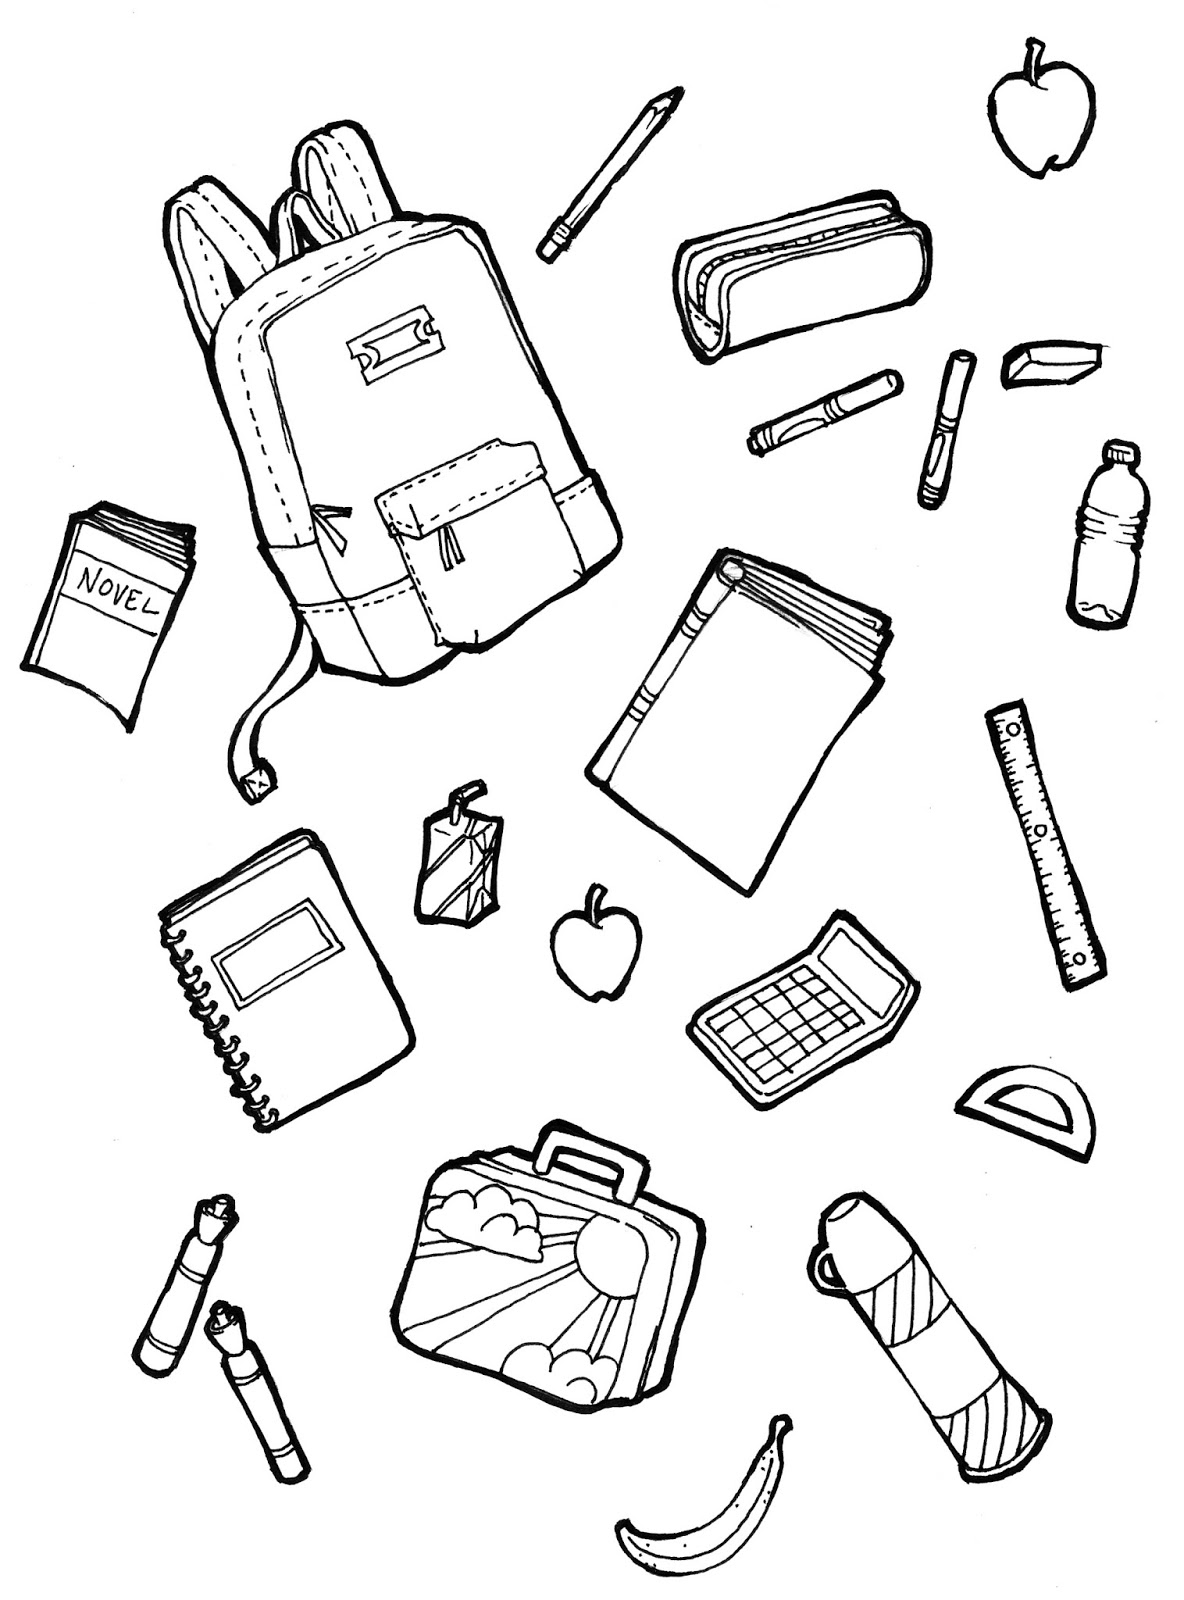 Classroom Objects Worksheets Cut And Paste Sketch Coloring Page